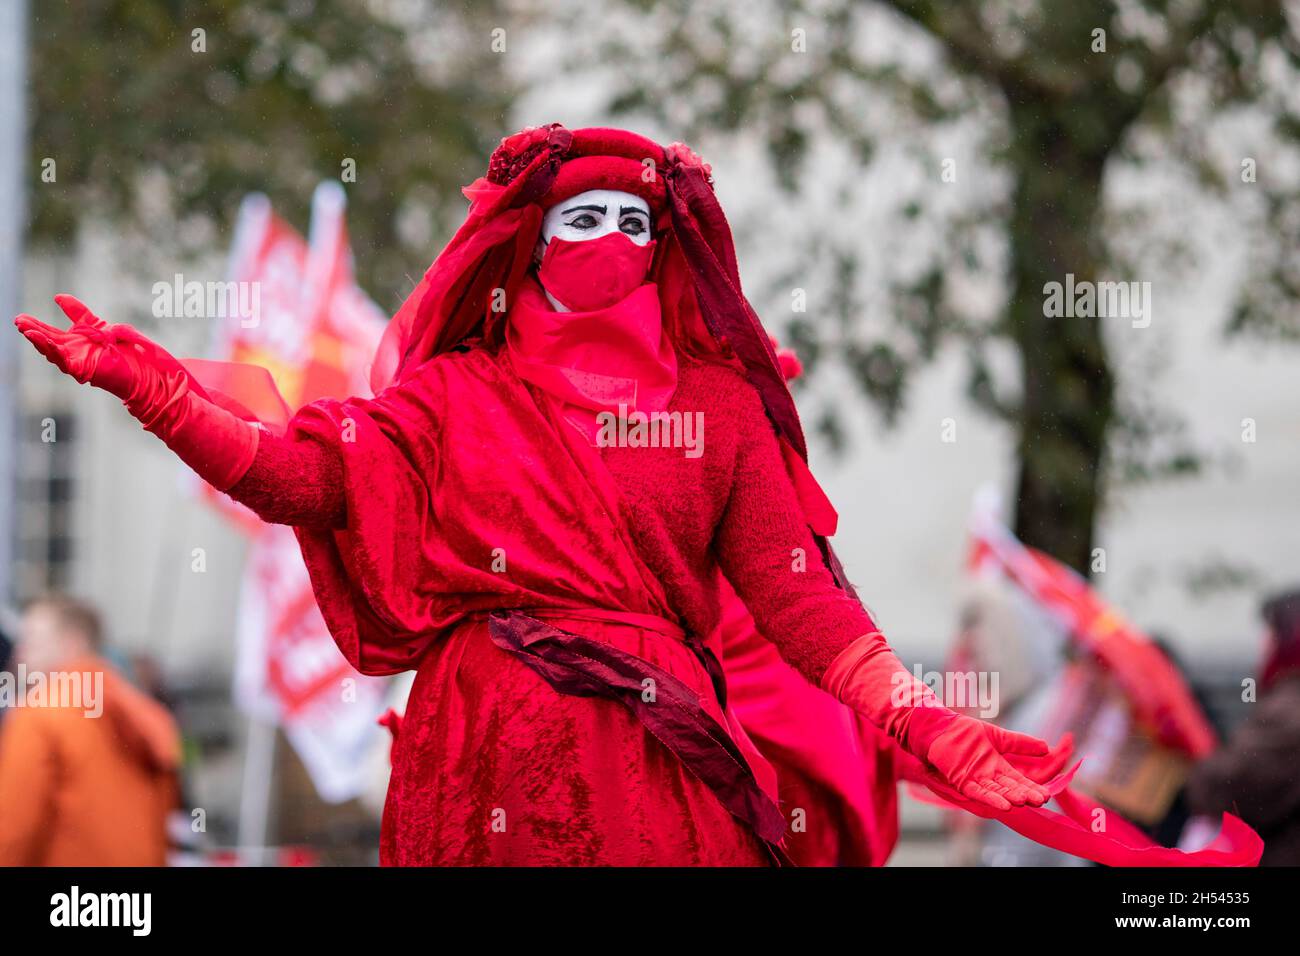 Cardiff, Wales, UK. 06th Nov, 2021. A member of Extinction Rebellion's red rebel brigade in Cardiff city centre as part of coordinated global activism during the COP26 summit in Glasgow, Scotland. Credit: Mark Hawkins/Alamy Live News Stock Photo